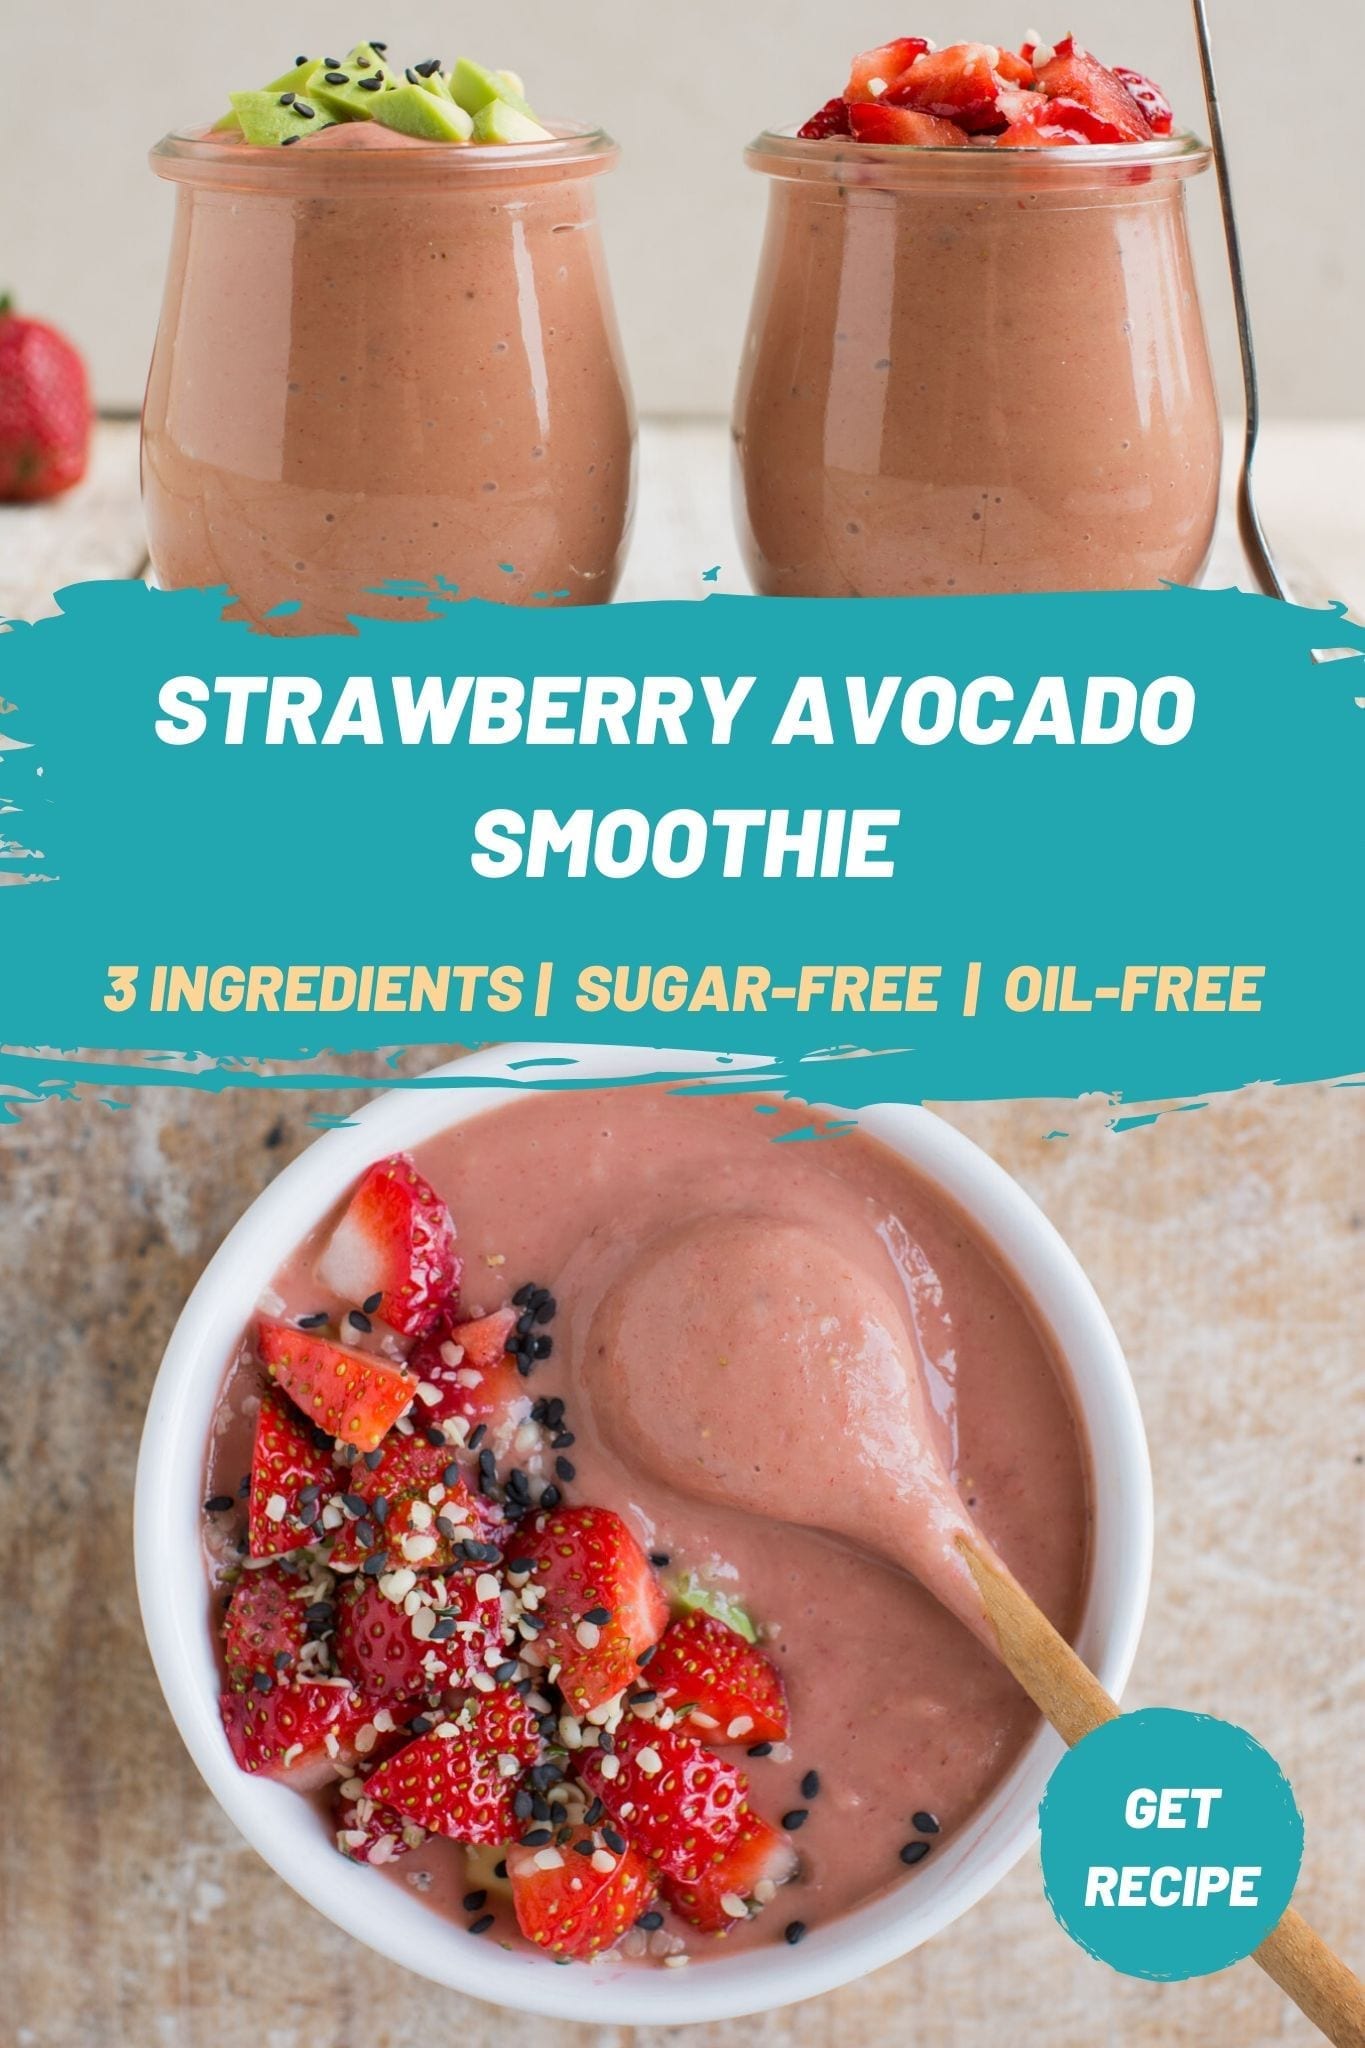 Delicious strawberry avocado smoothie with creamy texture that is extremely easy to make requiring just 3 ingredients. No added sugars or other additives!